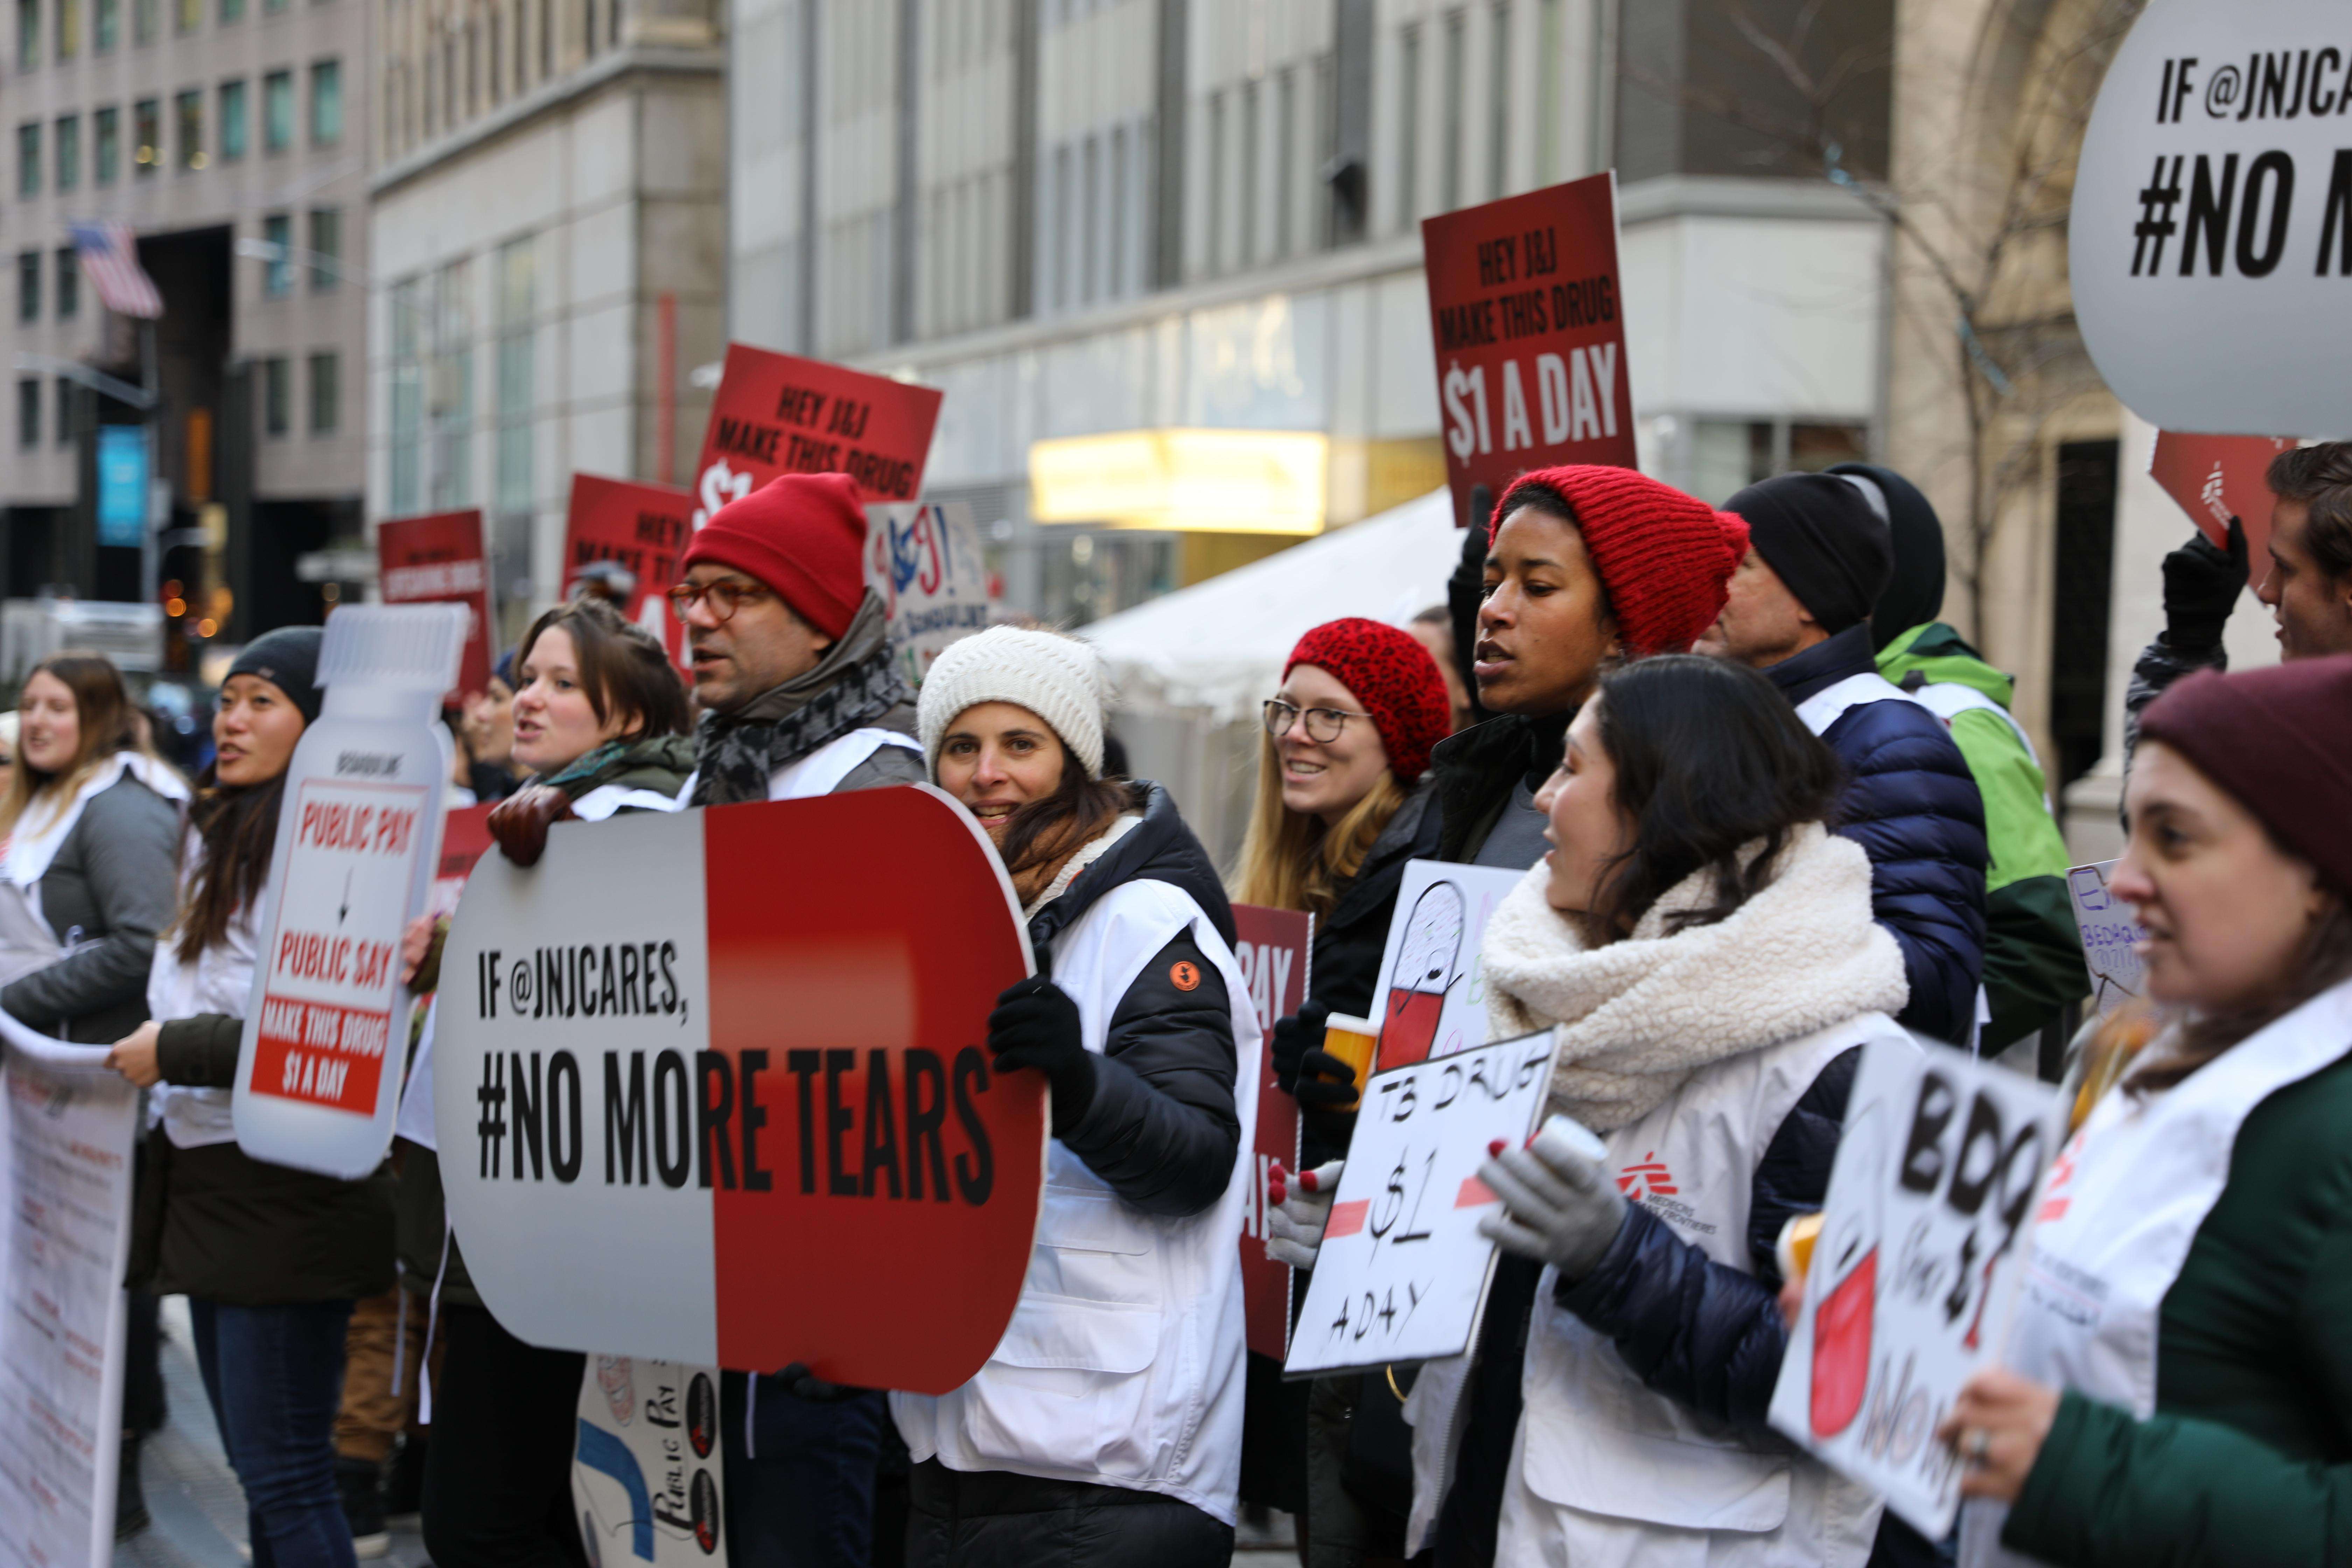 In front of the New York Stock Exchange, MSF demands J&J lower the price of the lifesaving TB drug bedaquiline following their US$82.1 billioin sales announcement.